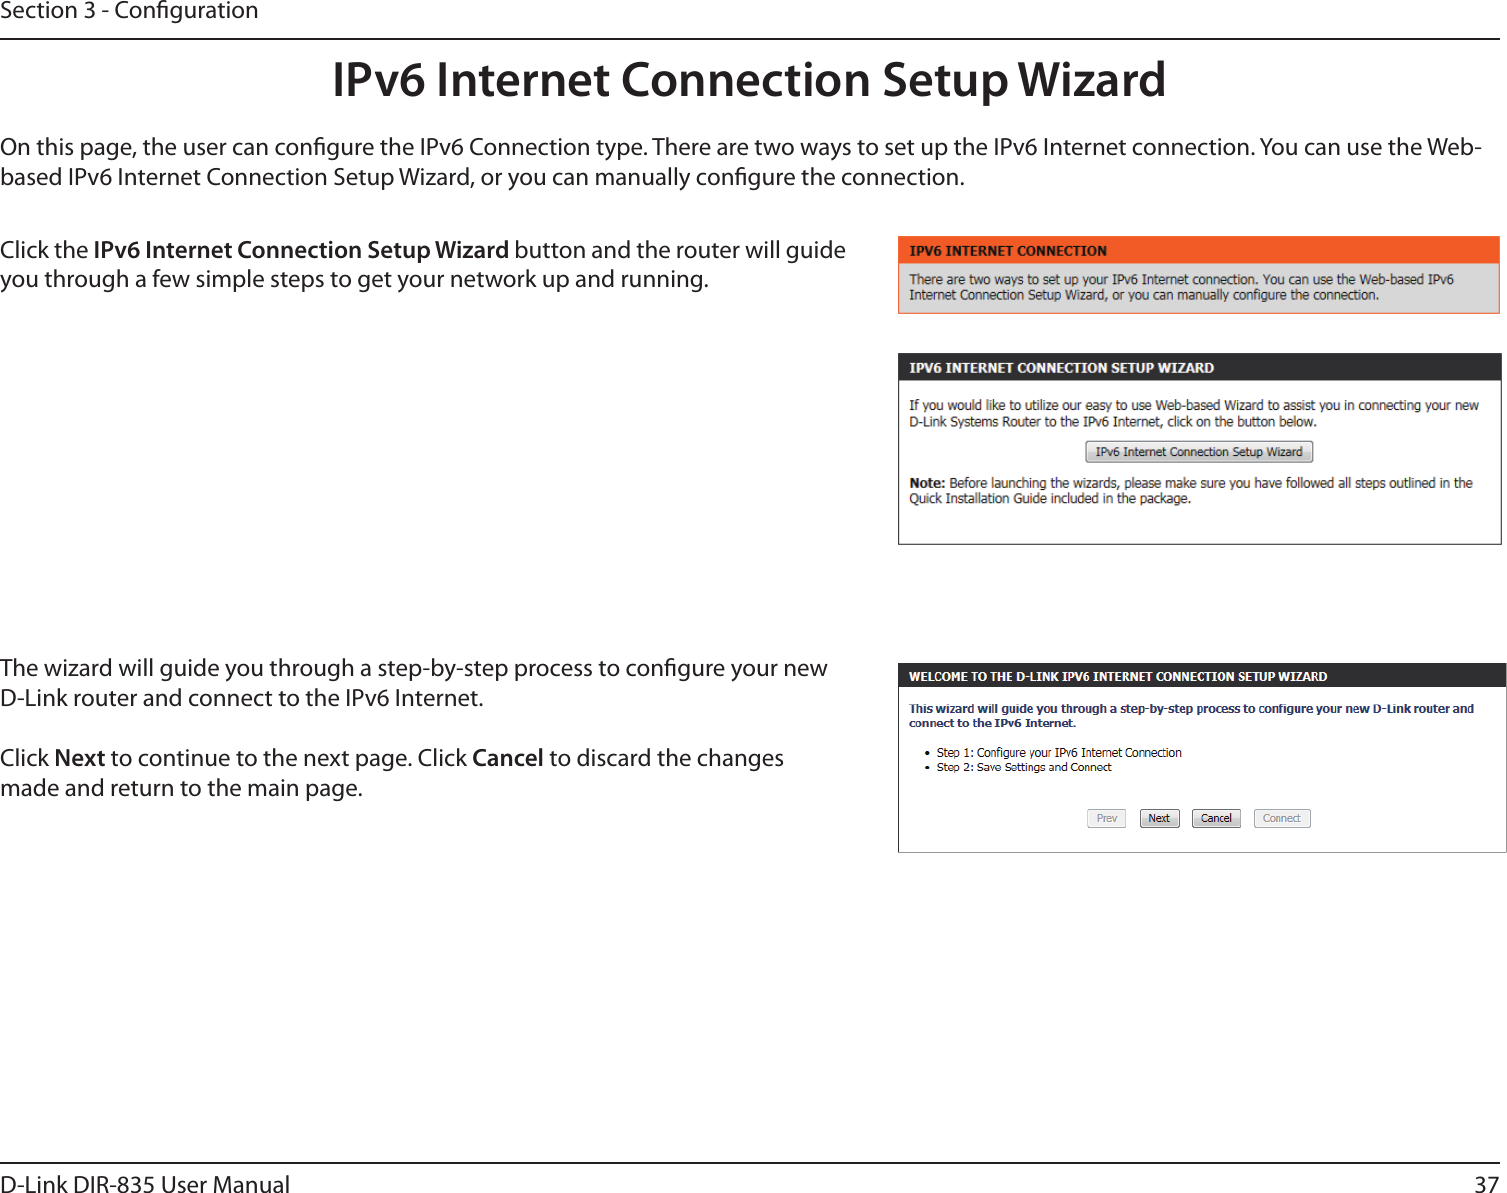 37D-Link DIR-835 User ManualSection 3 - CongurationIPv6 Internet Connection Setup WizardOn this page, the user can congure the IPv6 Connection type. There are two ways to set up the IPv6 Internet connection. You can use the Web-based IPv6 Internet Connection Setup Wizard, or you can manually congure the connection.Click the IPv6 Internet Connection Setup Wizard button and the router will guide you through a few simple steps to get your network up and running. The wizard will guide you through a step-by-step process to congure your new D-Link router and connect to the IPv6 Internet.Click Next to continue to the next page. Click Cancel to discard the changes made and return to the main page.